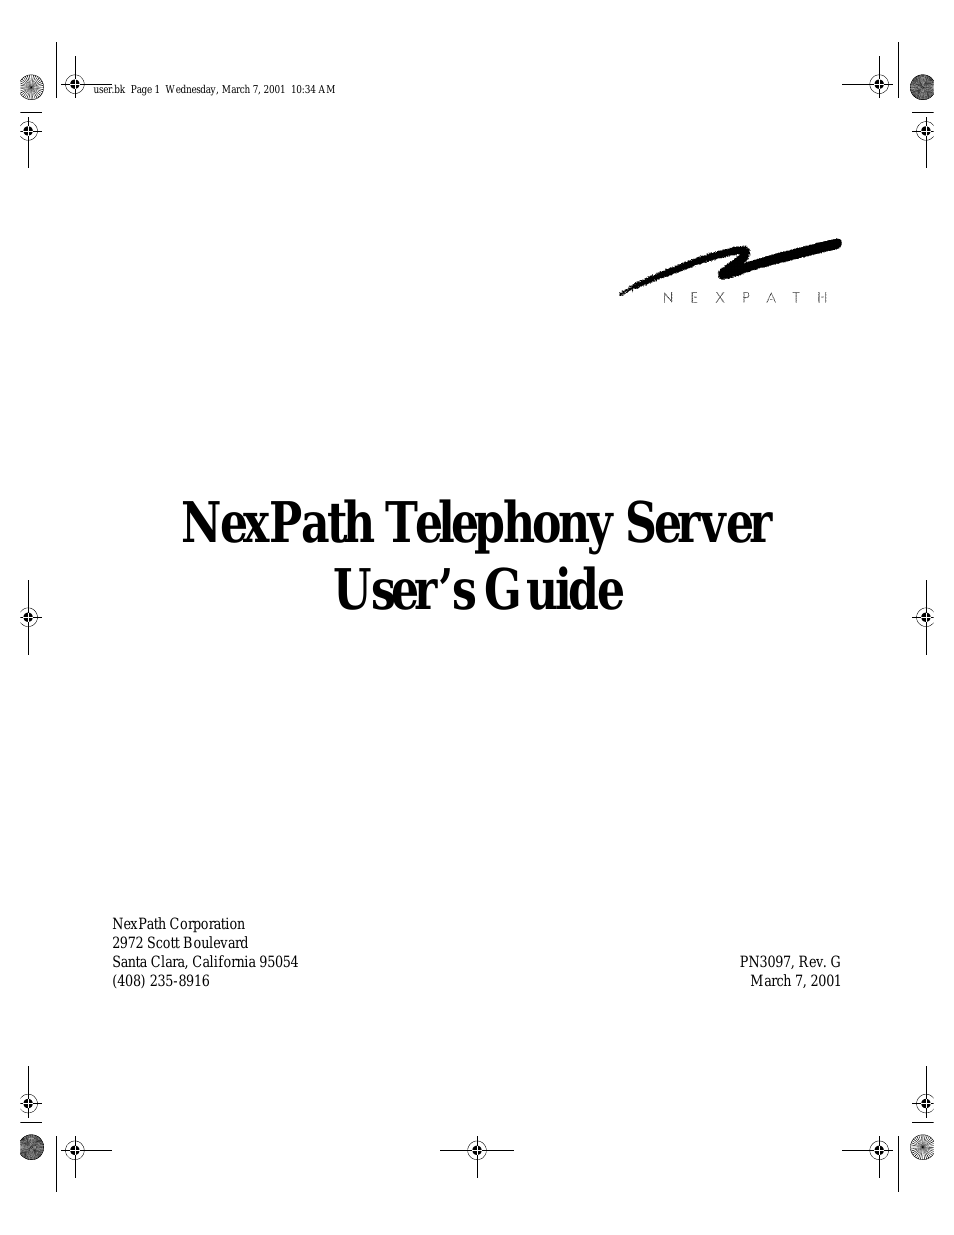 Telephony (Page 1)